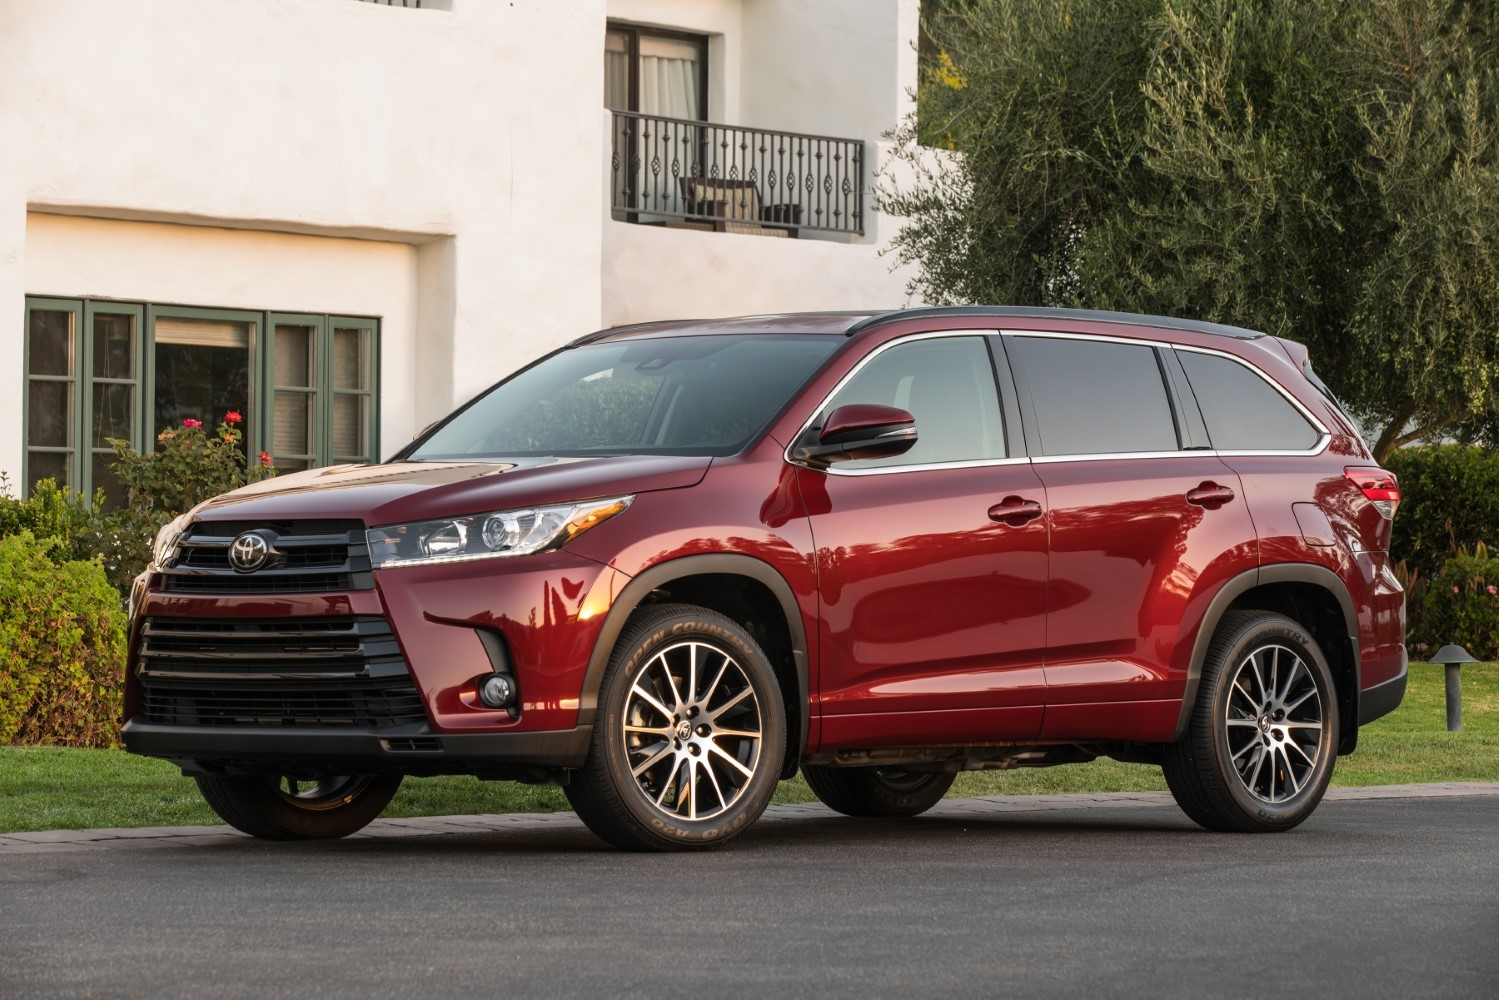 2018 Toyota Highlander SUV Specs, Review, and Pricing | CarSession